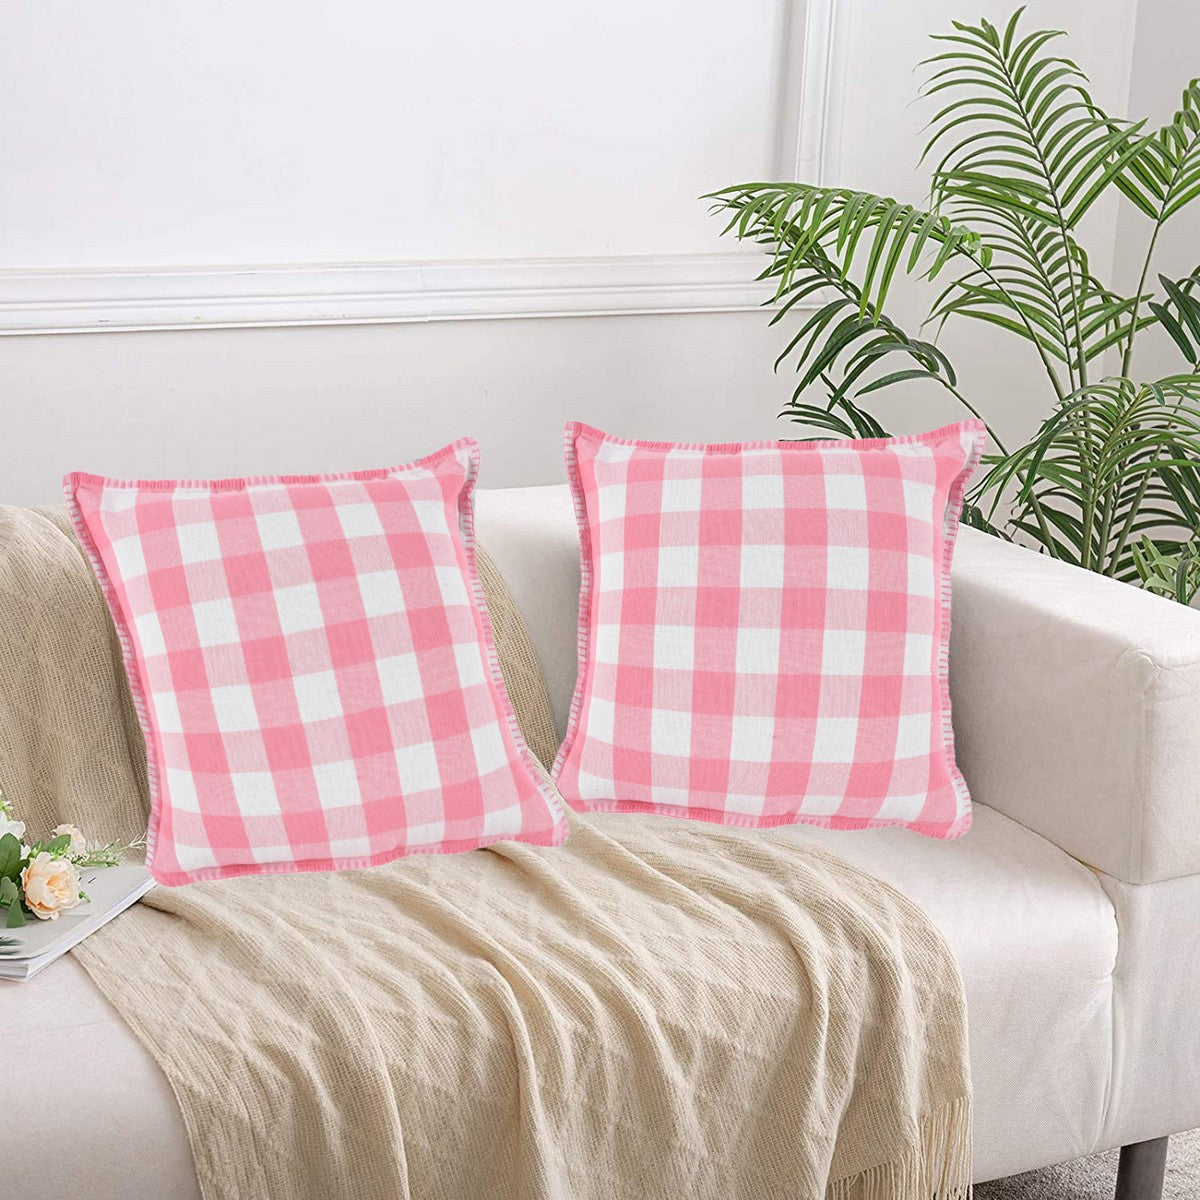 Lushomes Square Cushion Cover with Blanket Stitch, Cotton Sofa Pillow Cover Set of 2, 20x20 Inch, Big Checks, Pink and White Checks, Pillow Cushions Covers (Pack of 2, 50x50 Cms)